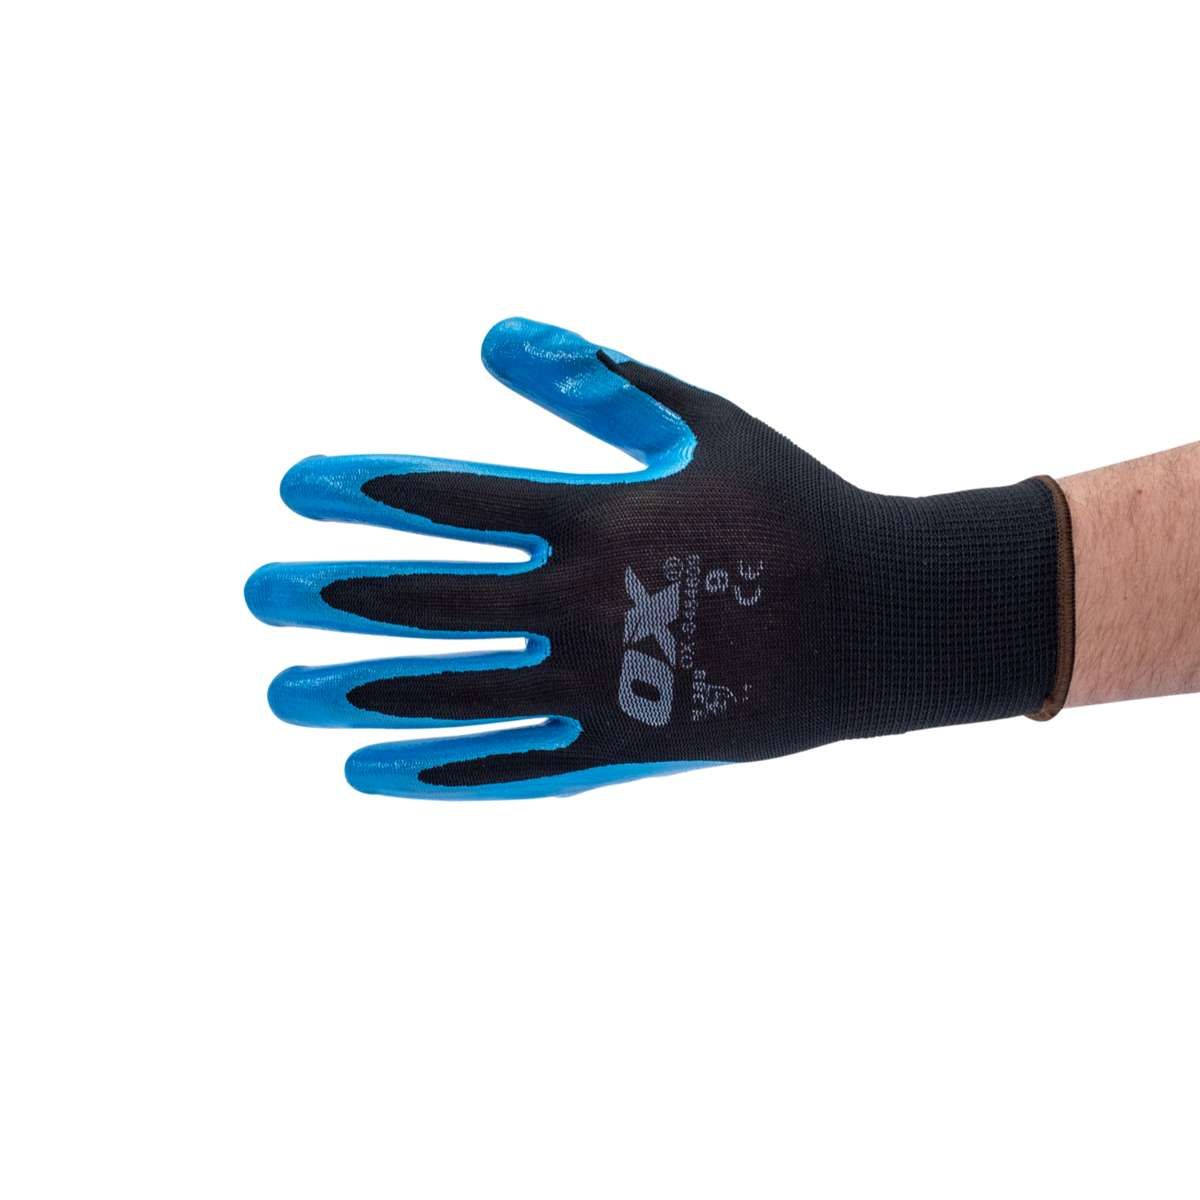 5Pk Size 9 Polyester Lined Nitrile Gloves OX-S484609 by OX Tools